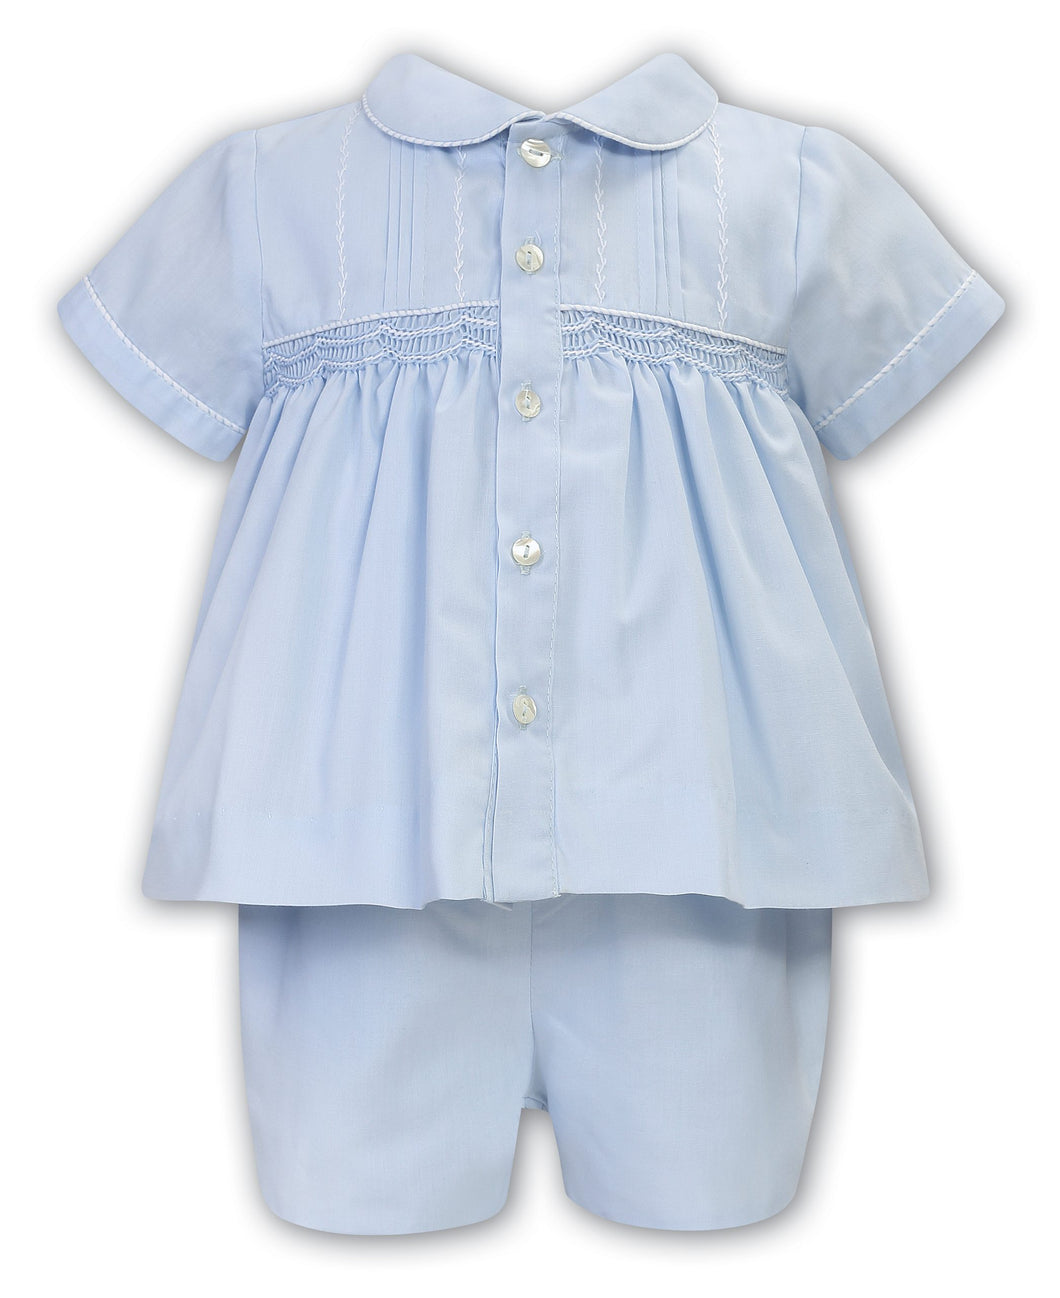 NEW SS24 Sarah Louise Boys Blue/White Smocked Outfit 013237